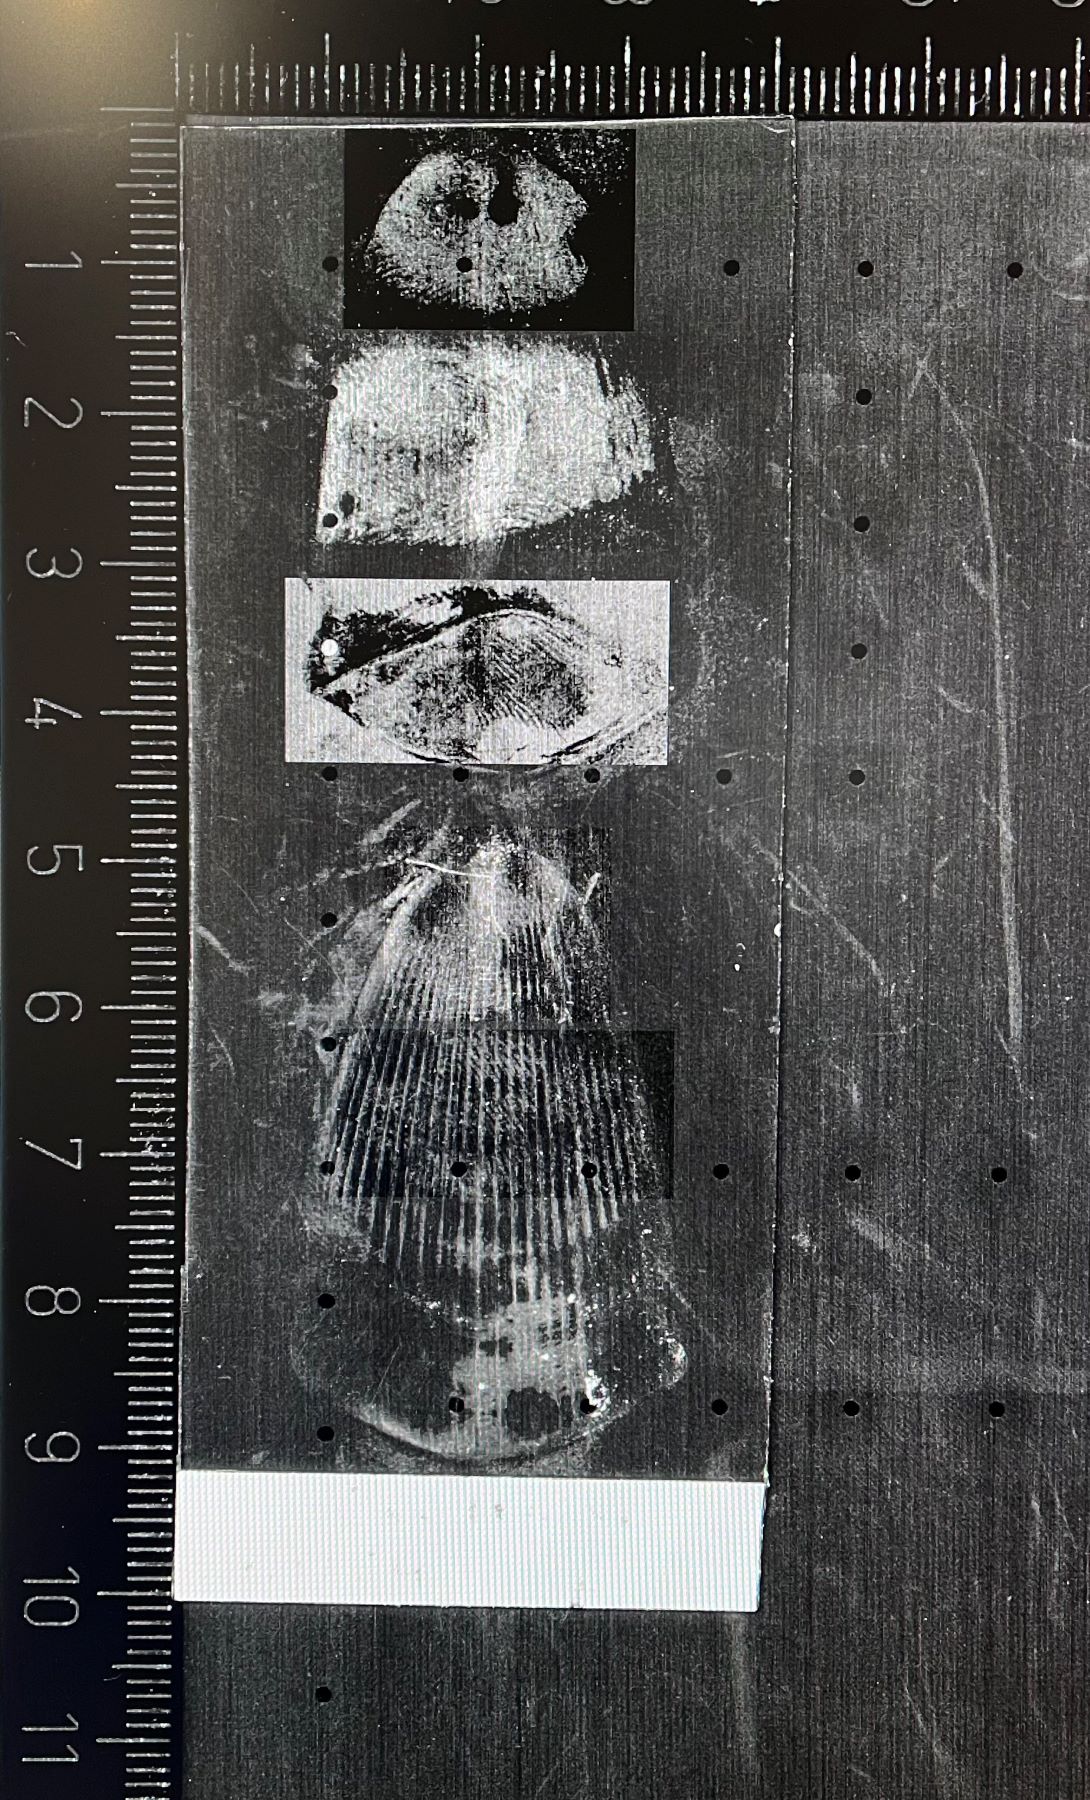 Image of fingerprints on a scale next to ruler for scale